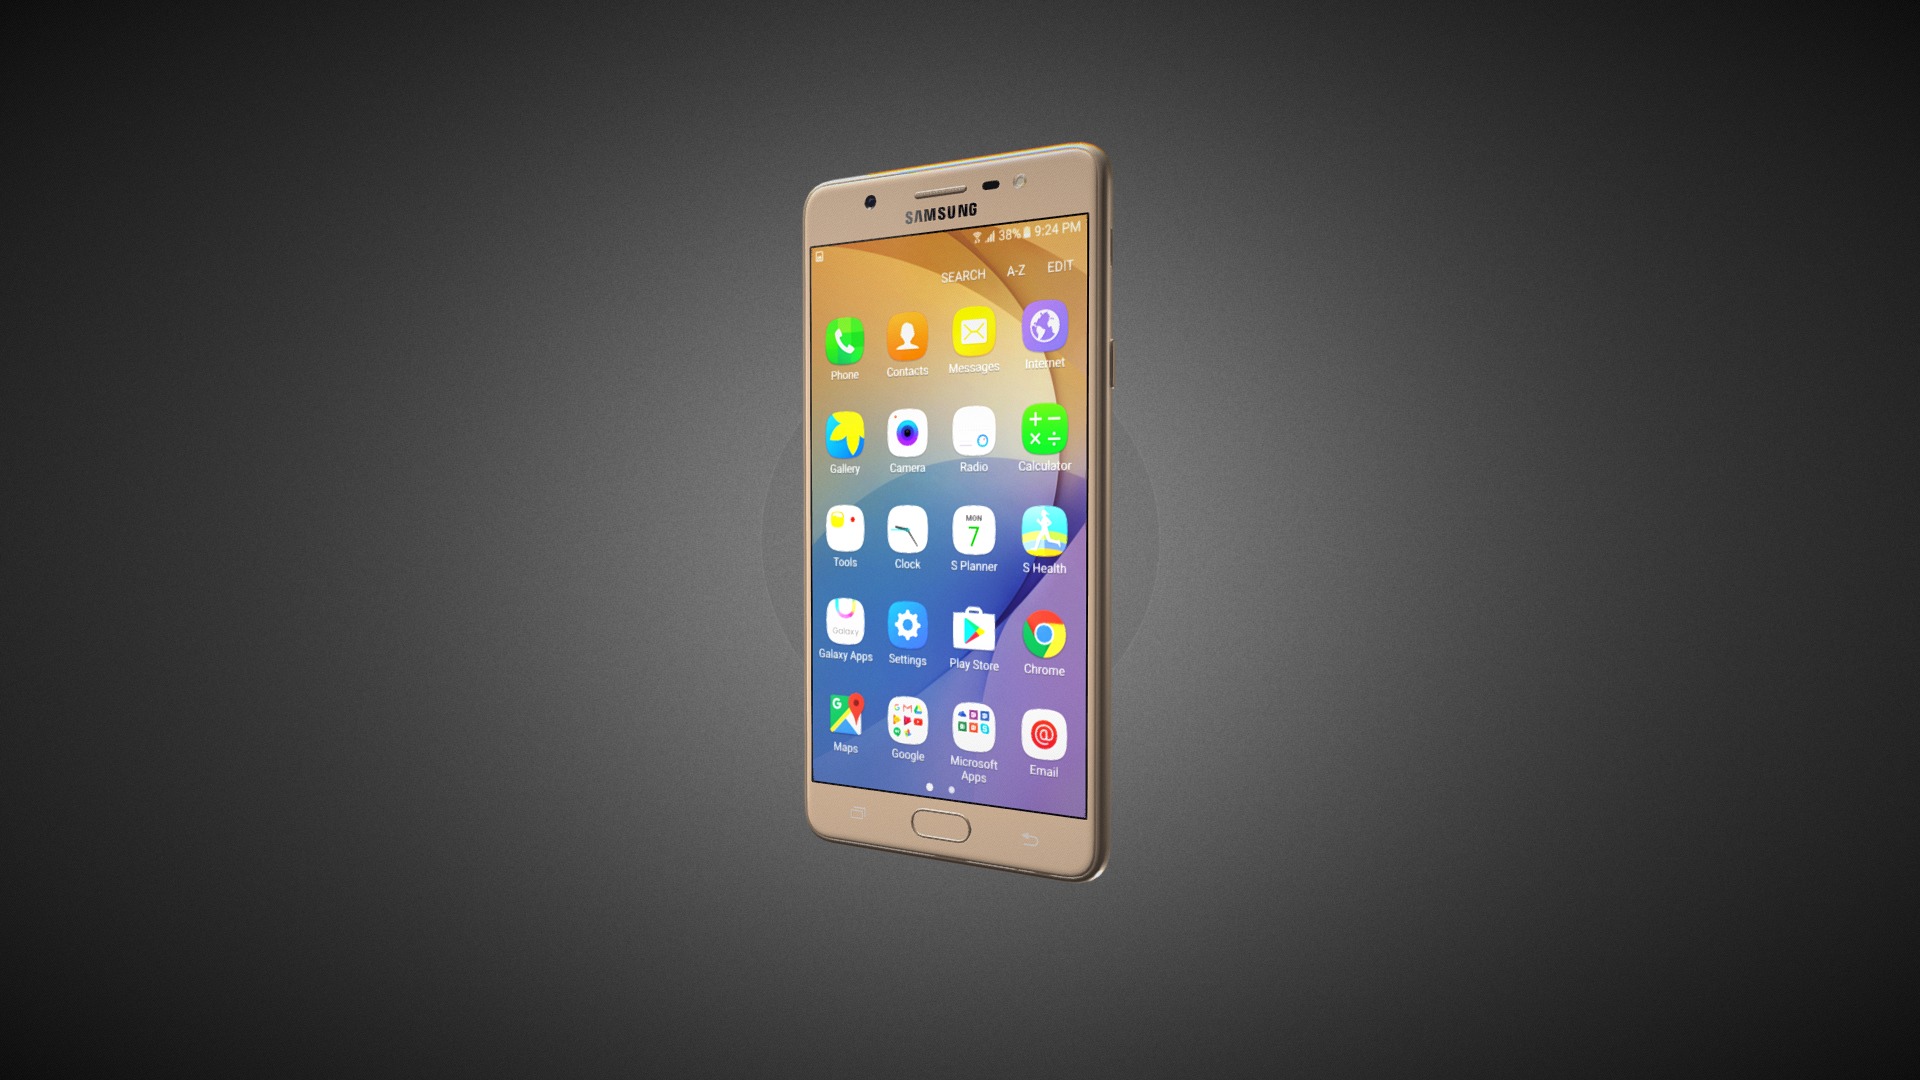 3D model Samsung Galaxy J7 Max for Element 3D - This is a 3D model of the Samsung Galaxy J7 Max for Element 3D. The 3D model is about a cell phone with a cracked screen.